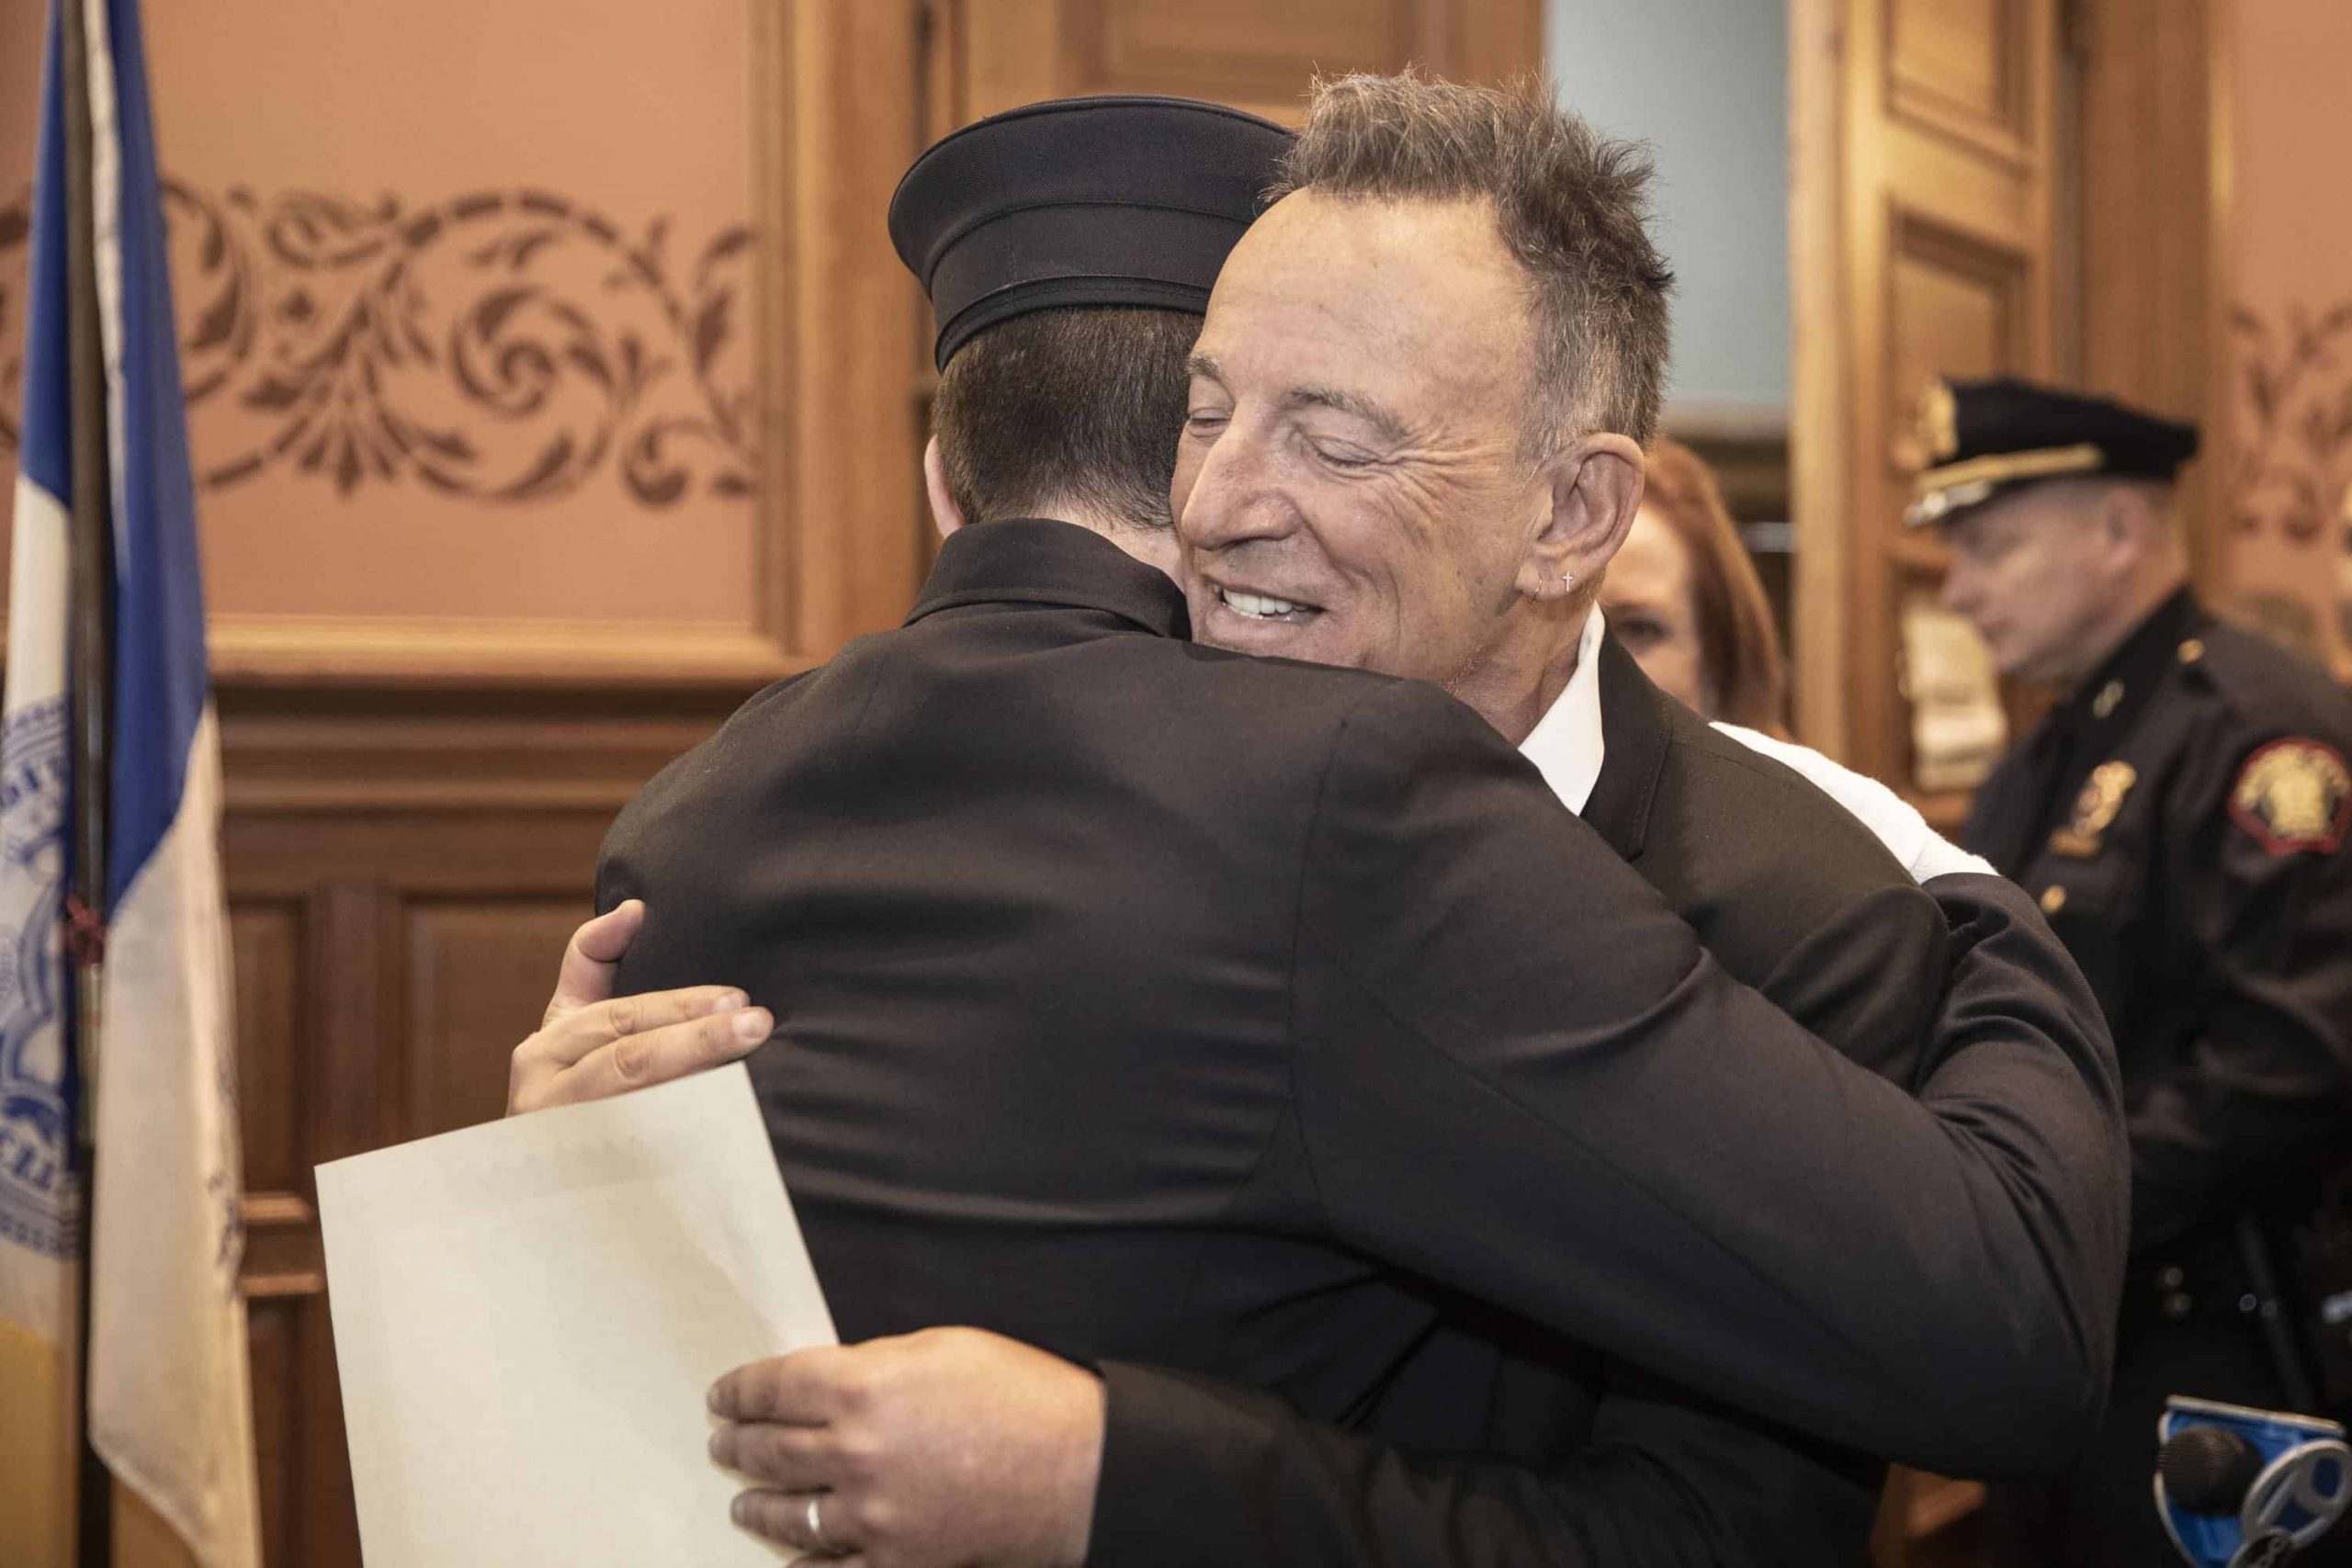 Bruce Springsteen shows up for son’s swearing-in as firefighter